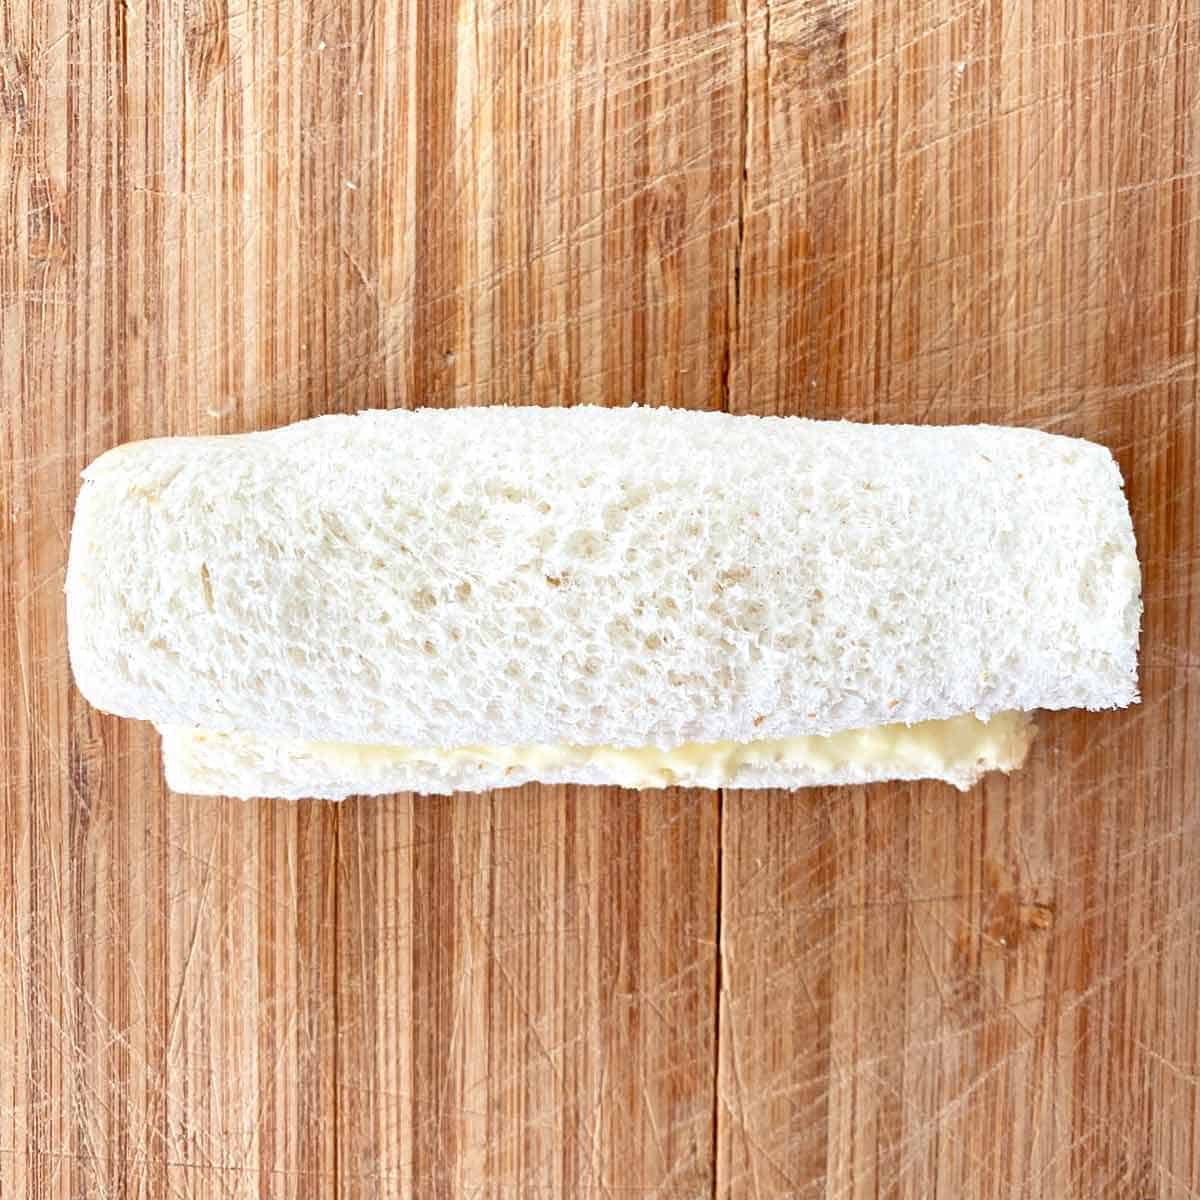 A trimmed bread slice wrapped around cream cheese filling in a roll shape.